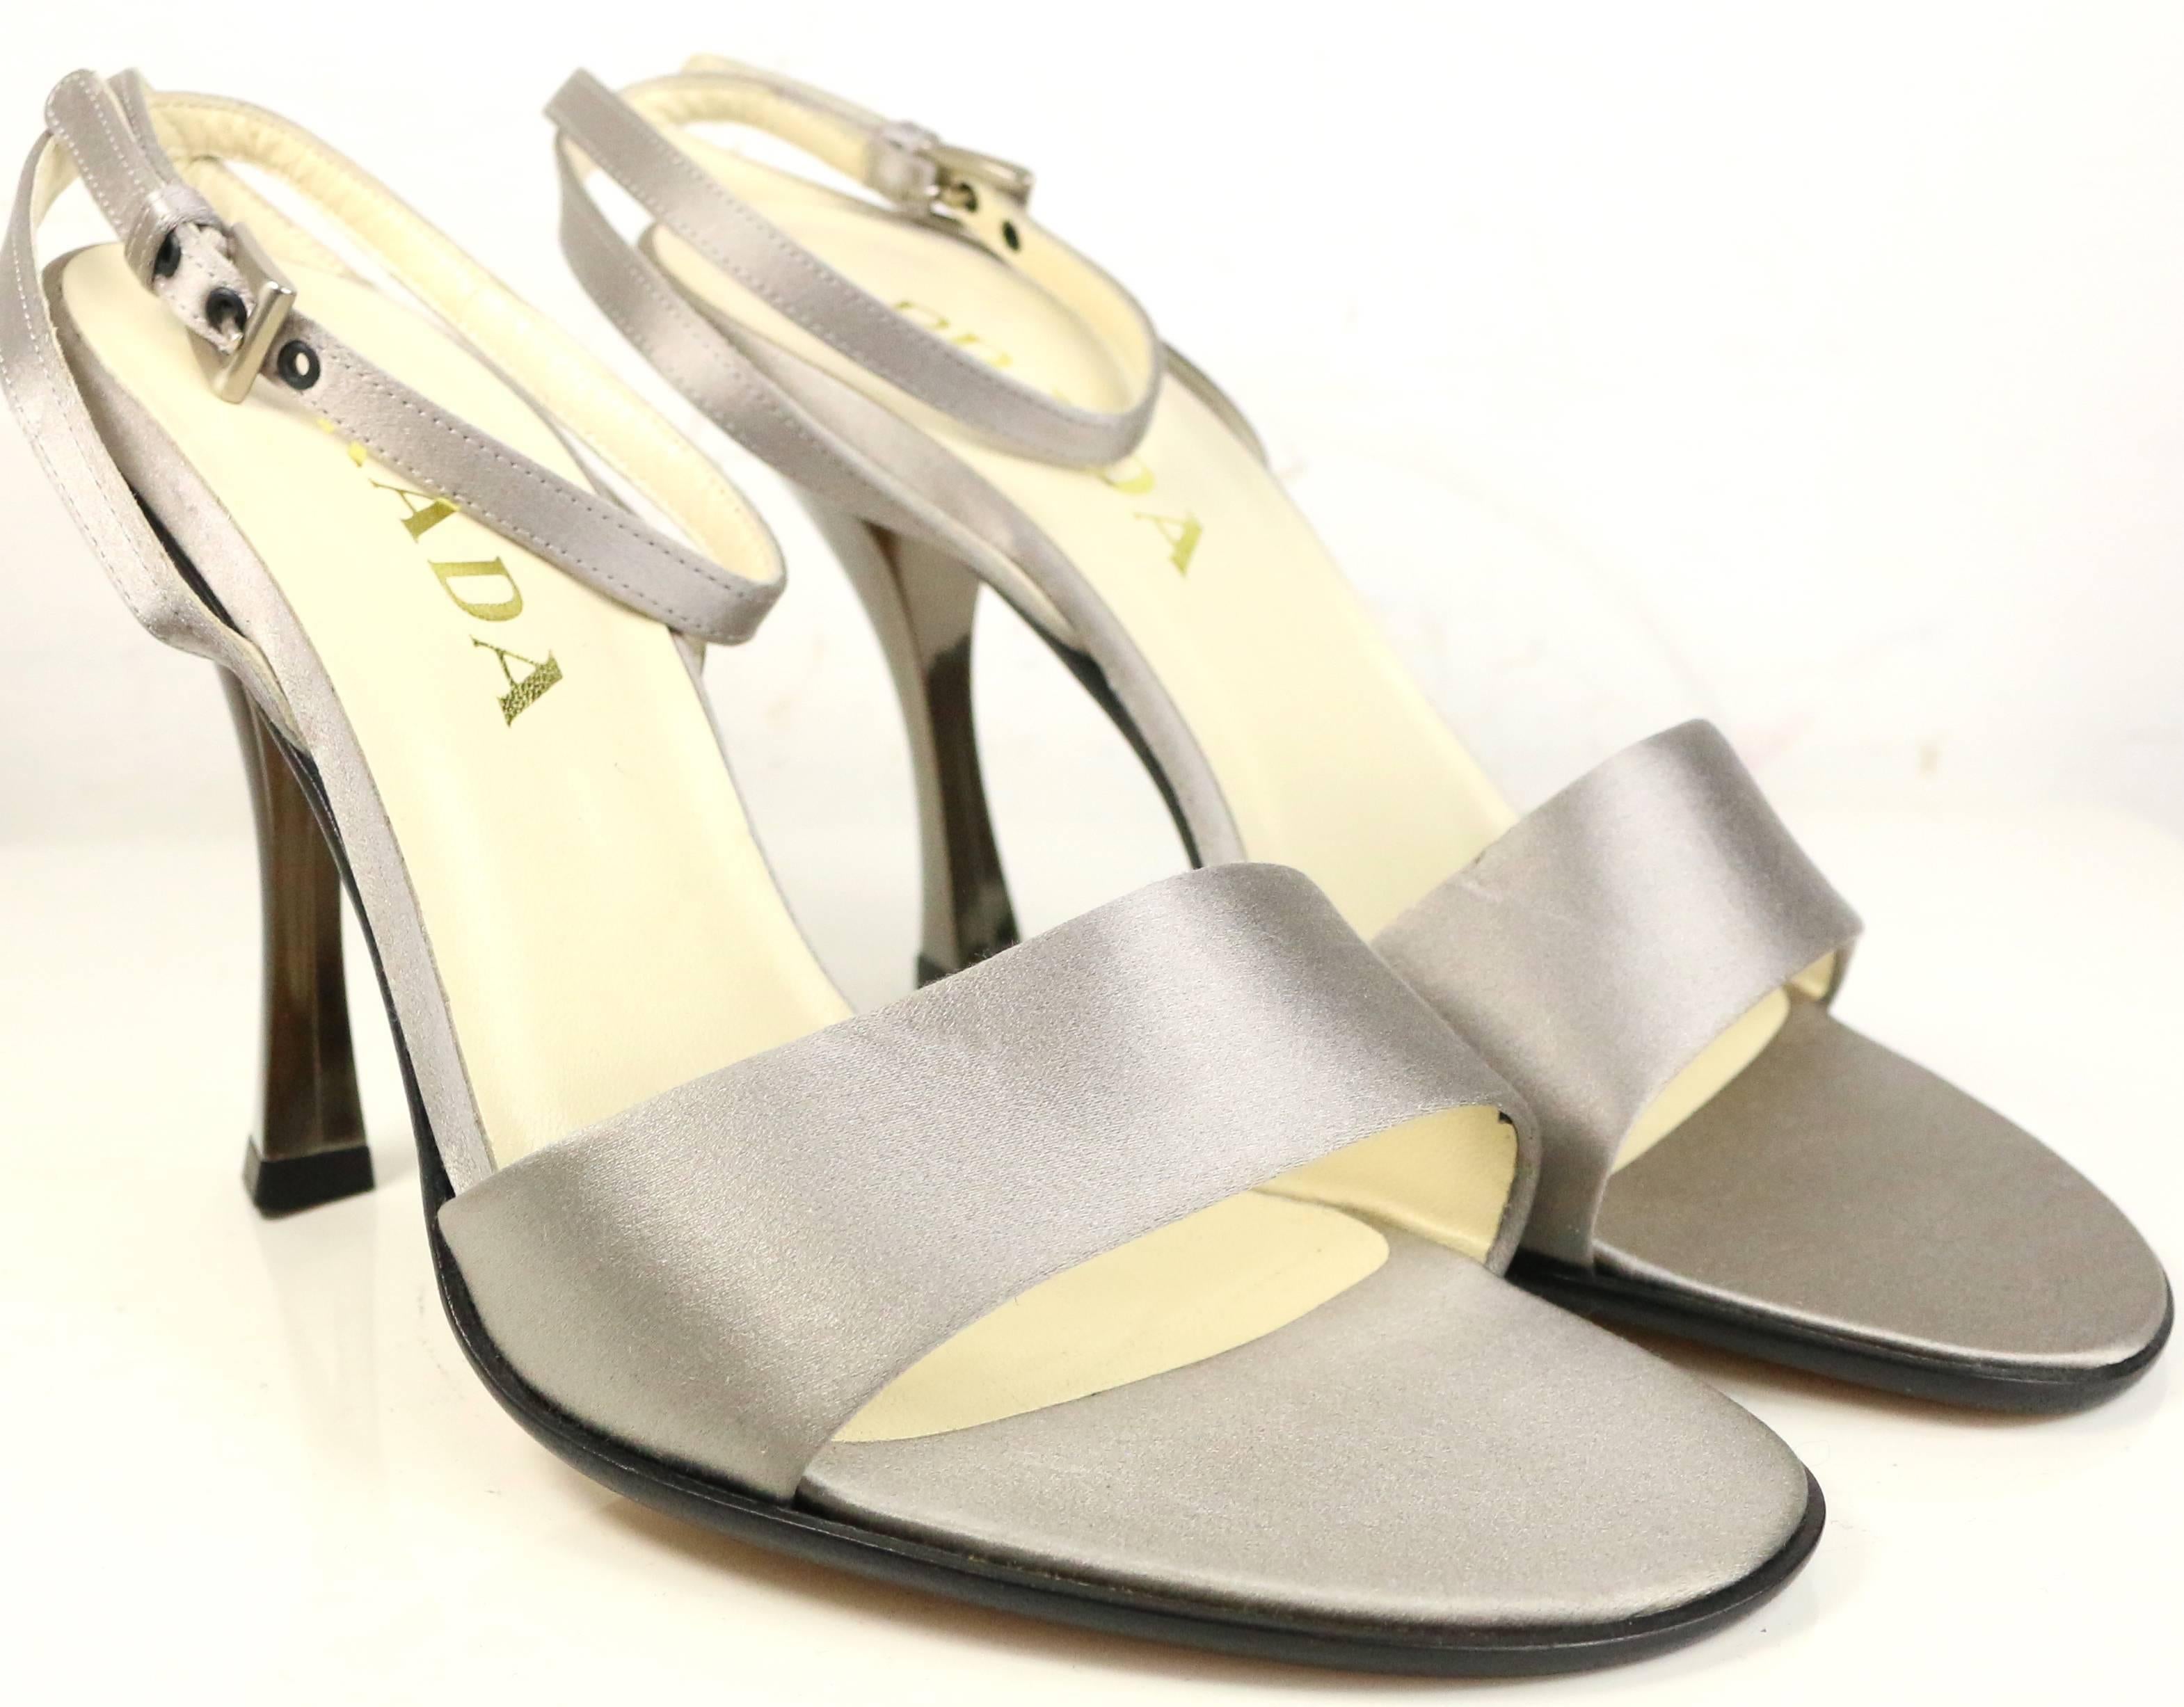 - Vintage 90s Prada silver satin strap slingback sandals heels. 

- Made in Italy. 

- Size 37.5 





